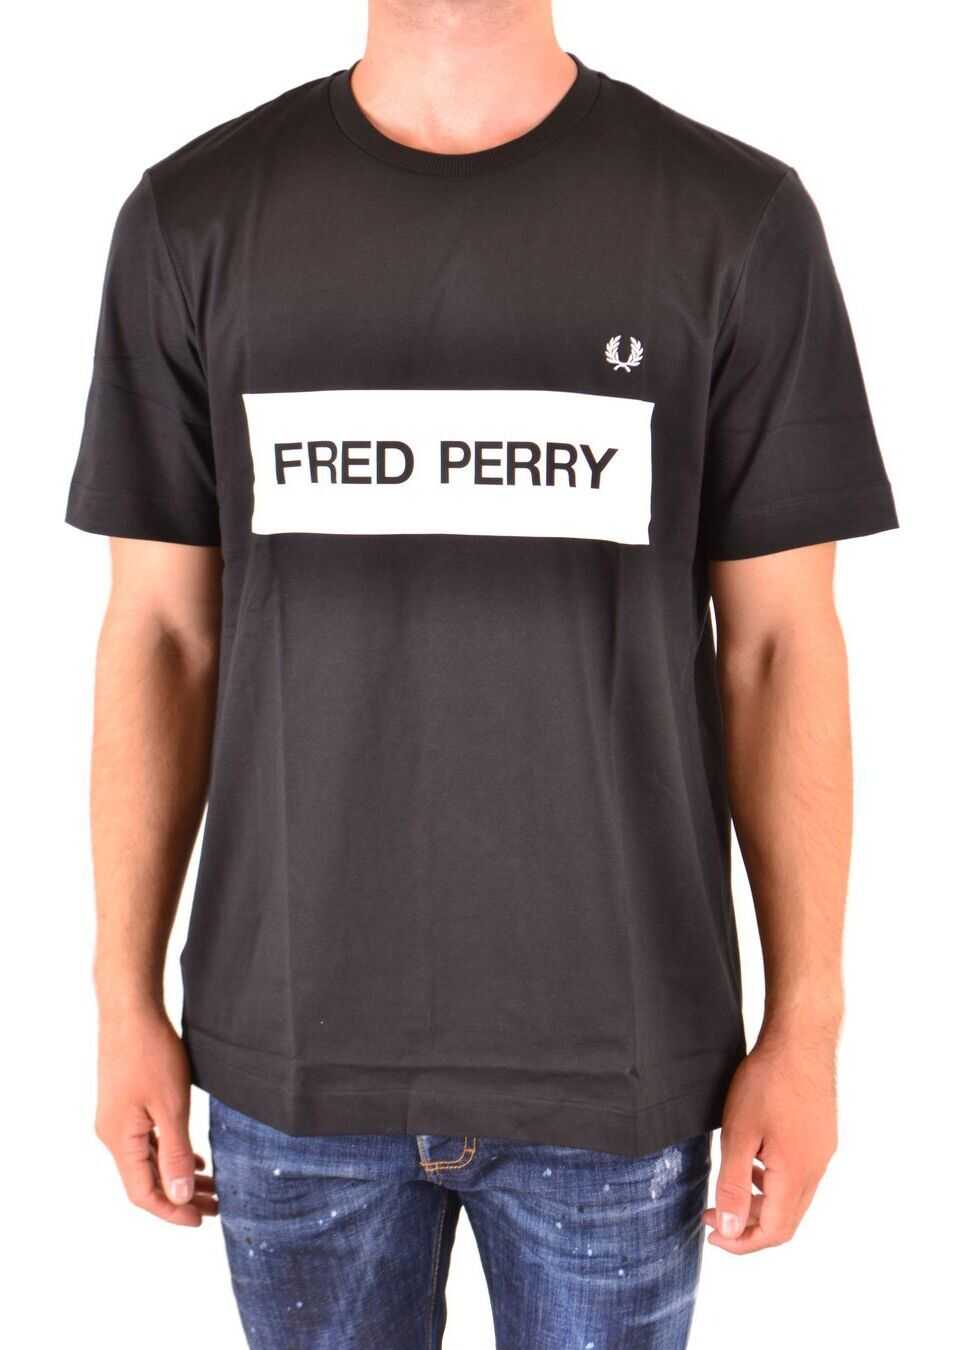 Fred Perry Cotton T-Shirt BLACK